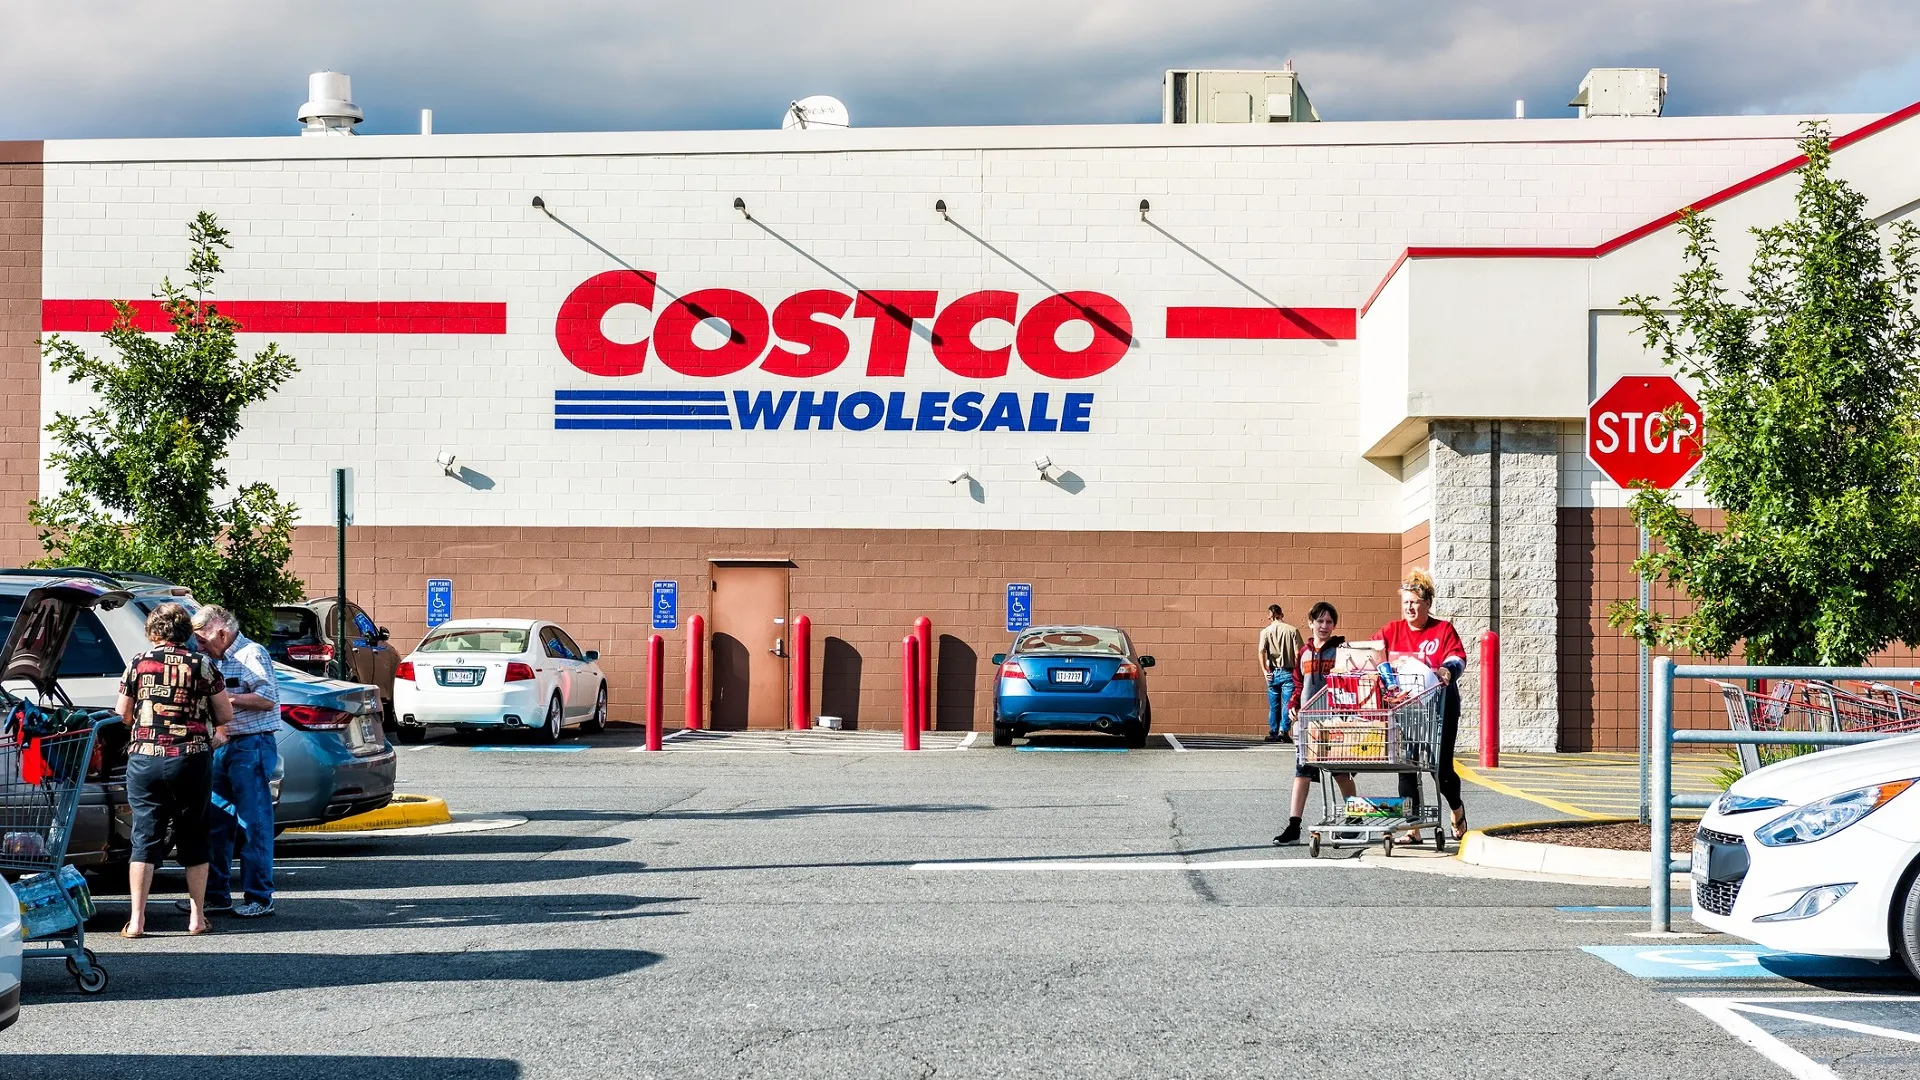 People with shopping carts filled with groceries goods, products walking out of Costco store in Virginia in parking car lot stock photo